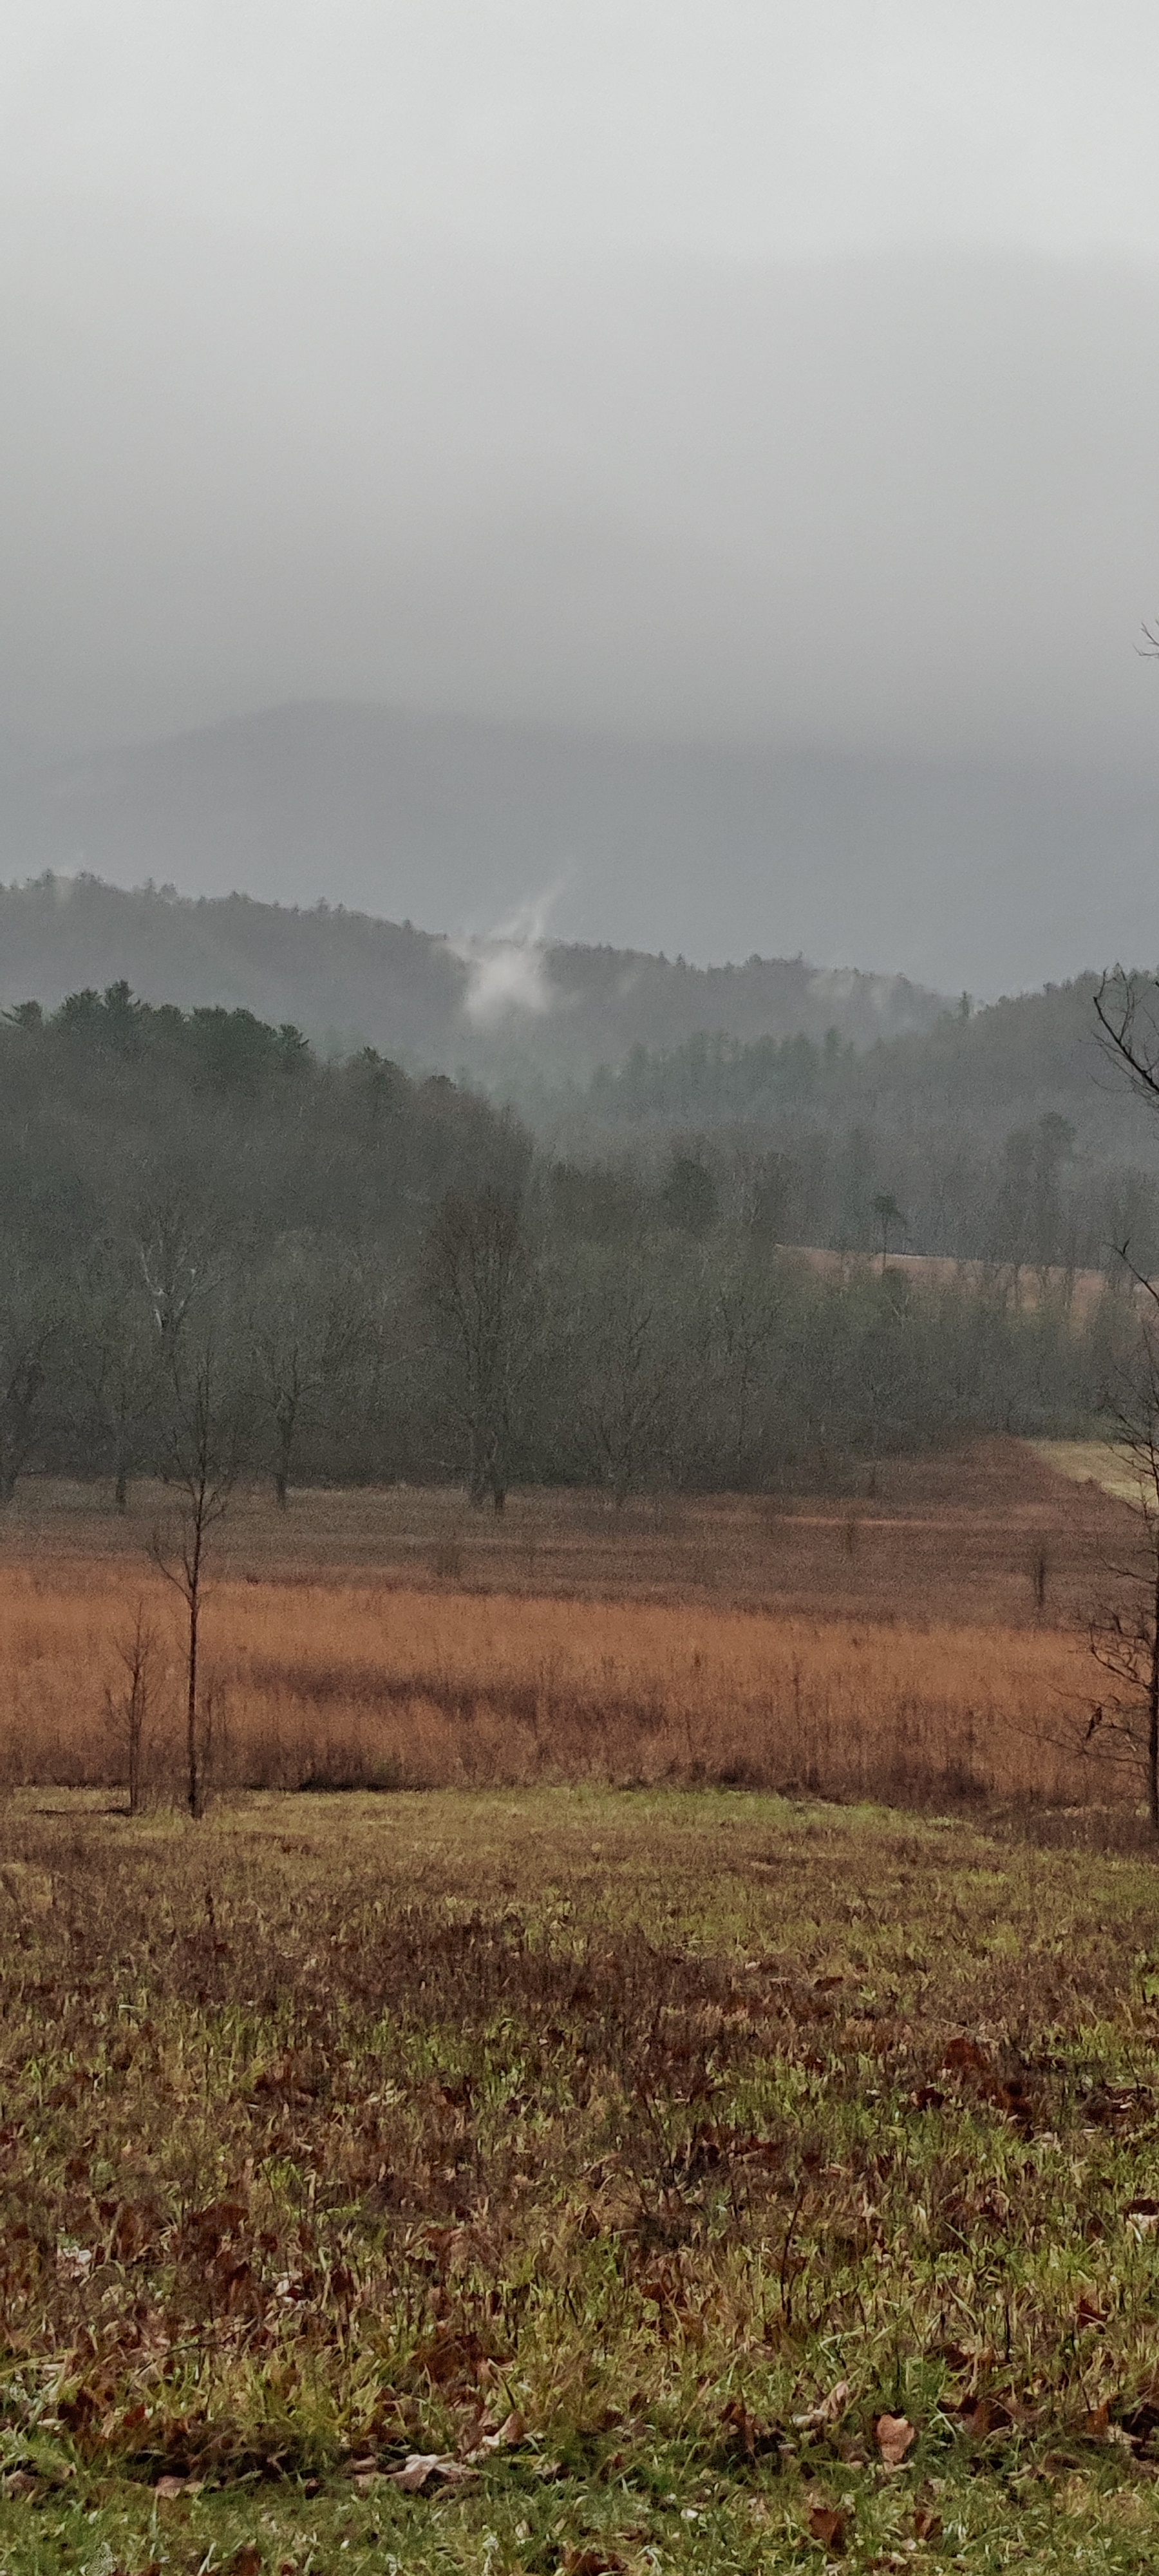 Cades cove on our trip to summit of Gatlinburg...